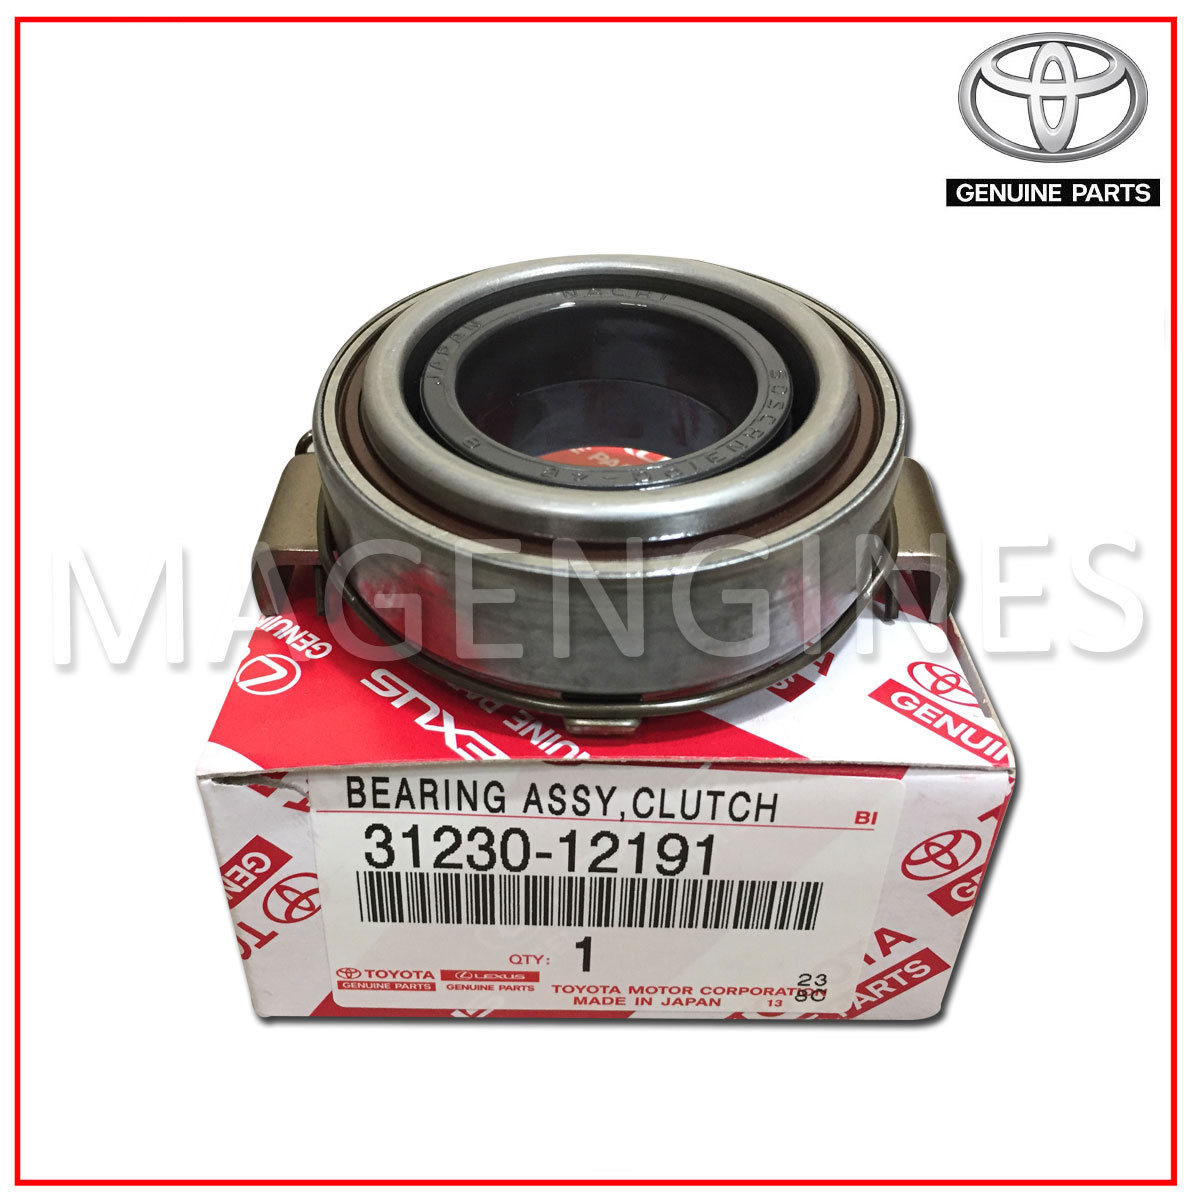 31230-12191 TOYOTA GENUINE CLUTCH RELEASE BEARING ASSY 3123012191 – Mag  Engines